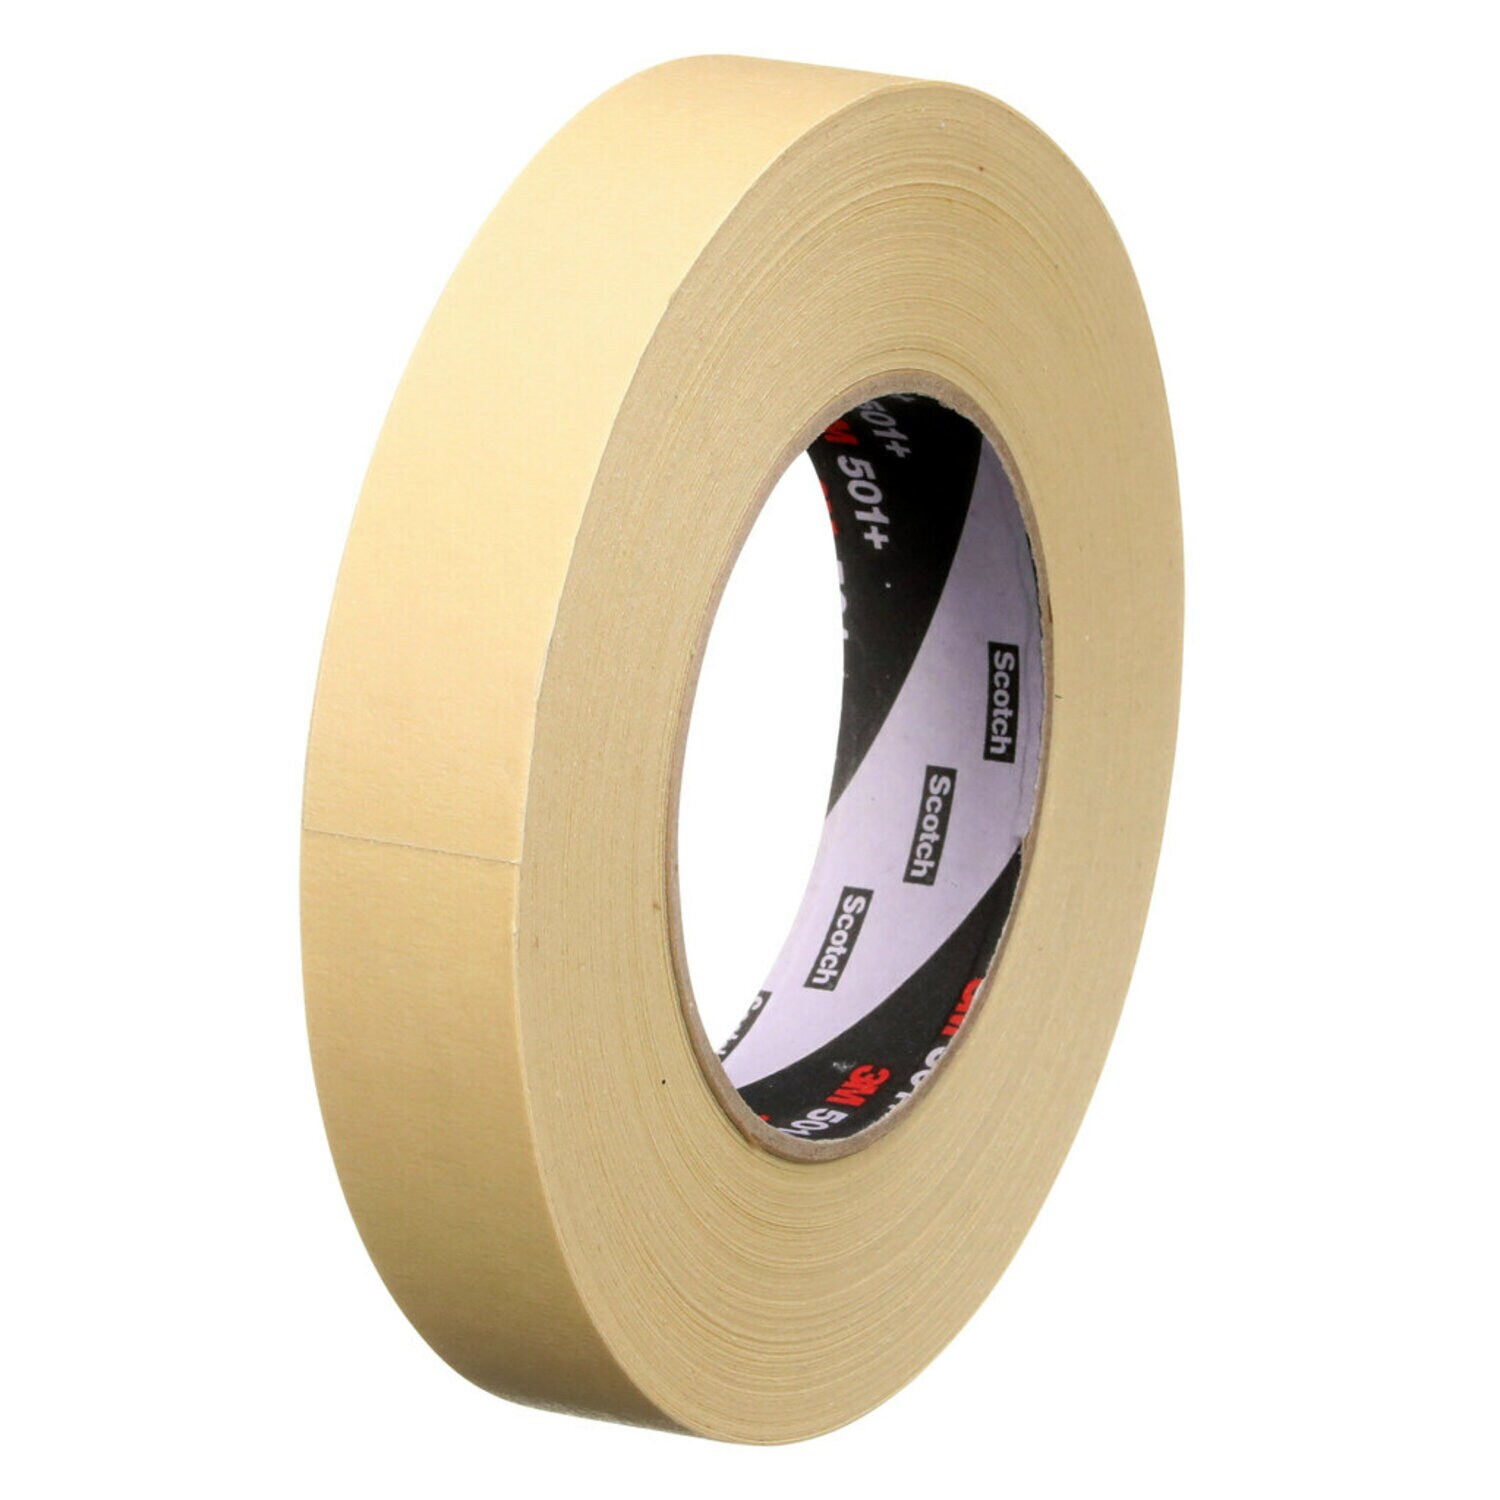 7000138486 - 3M Specialty High Temperature Masking Tape 501+, Tan, 24 mm x 55 m, 7.3
mil, 36 Rolls/Case